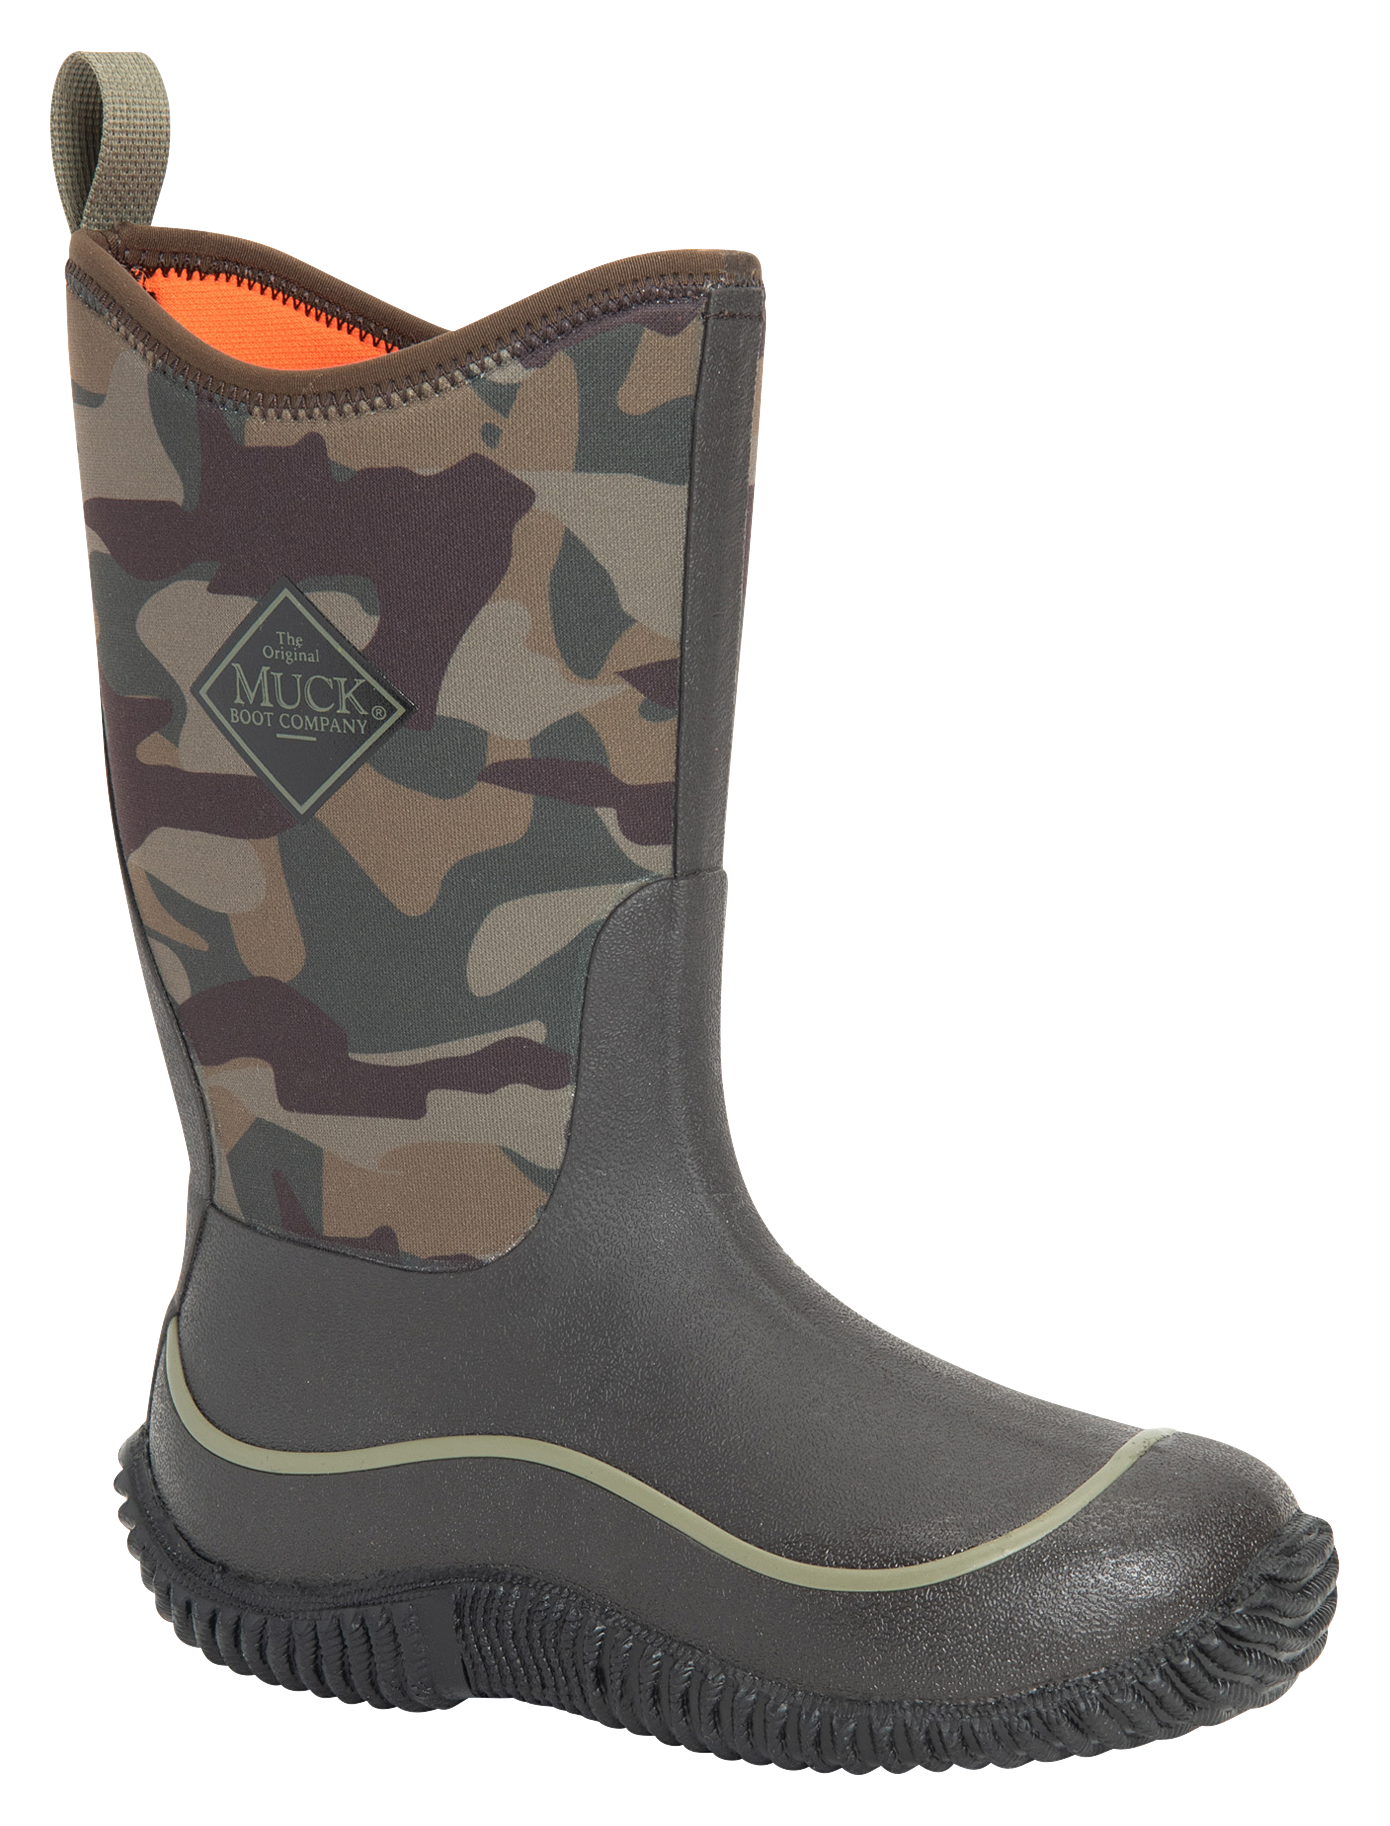 The Original Muck Boot Company Hale Rubber Boots for Kids - Camo - 8M